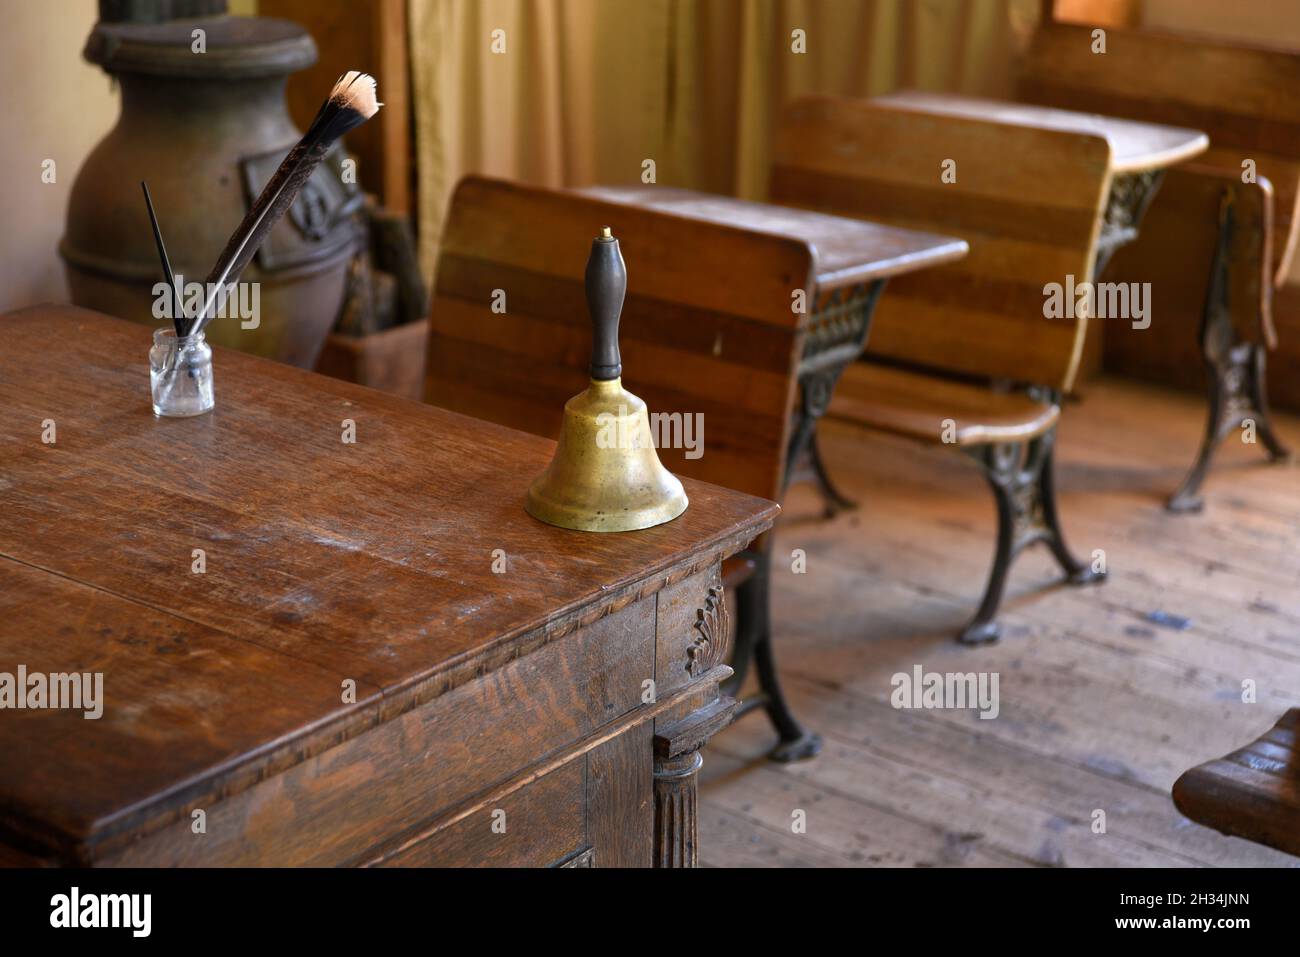 A handbell sits on the teacher's desk in a recreated 19th century school room at El Rancho de las Golondrinas living history museum in New Mexico USA. Stock Photo